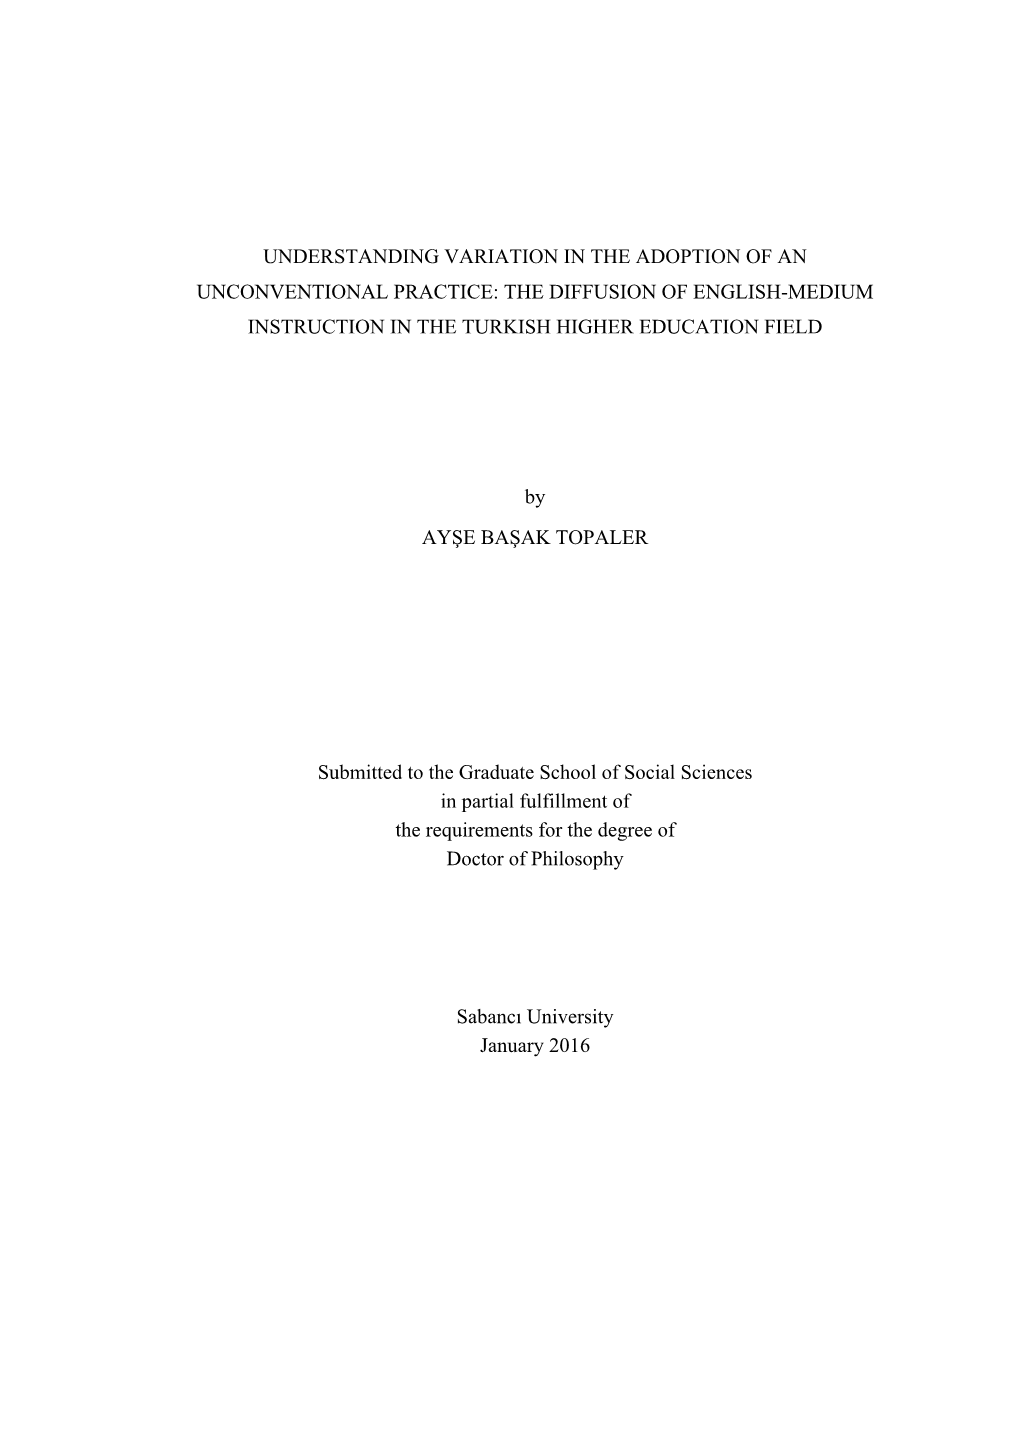 The Diffusion of English-Medium Instruction in the Turkish Higher Education Field